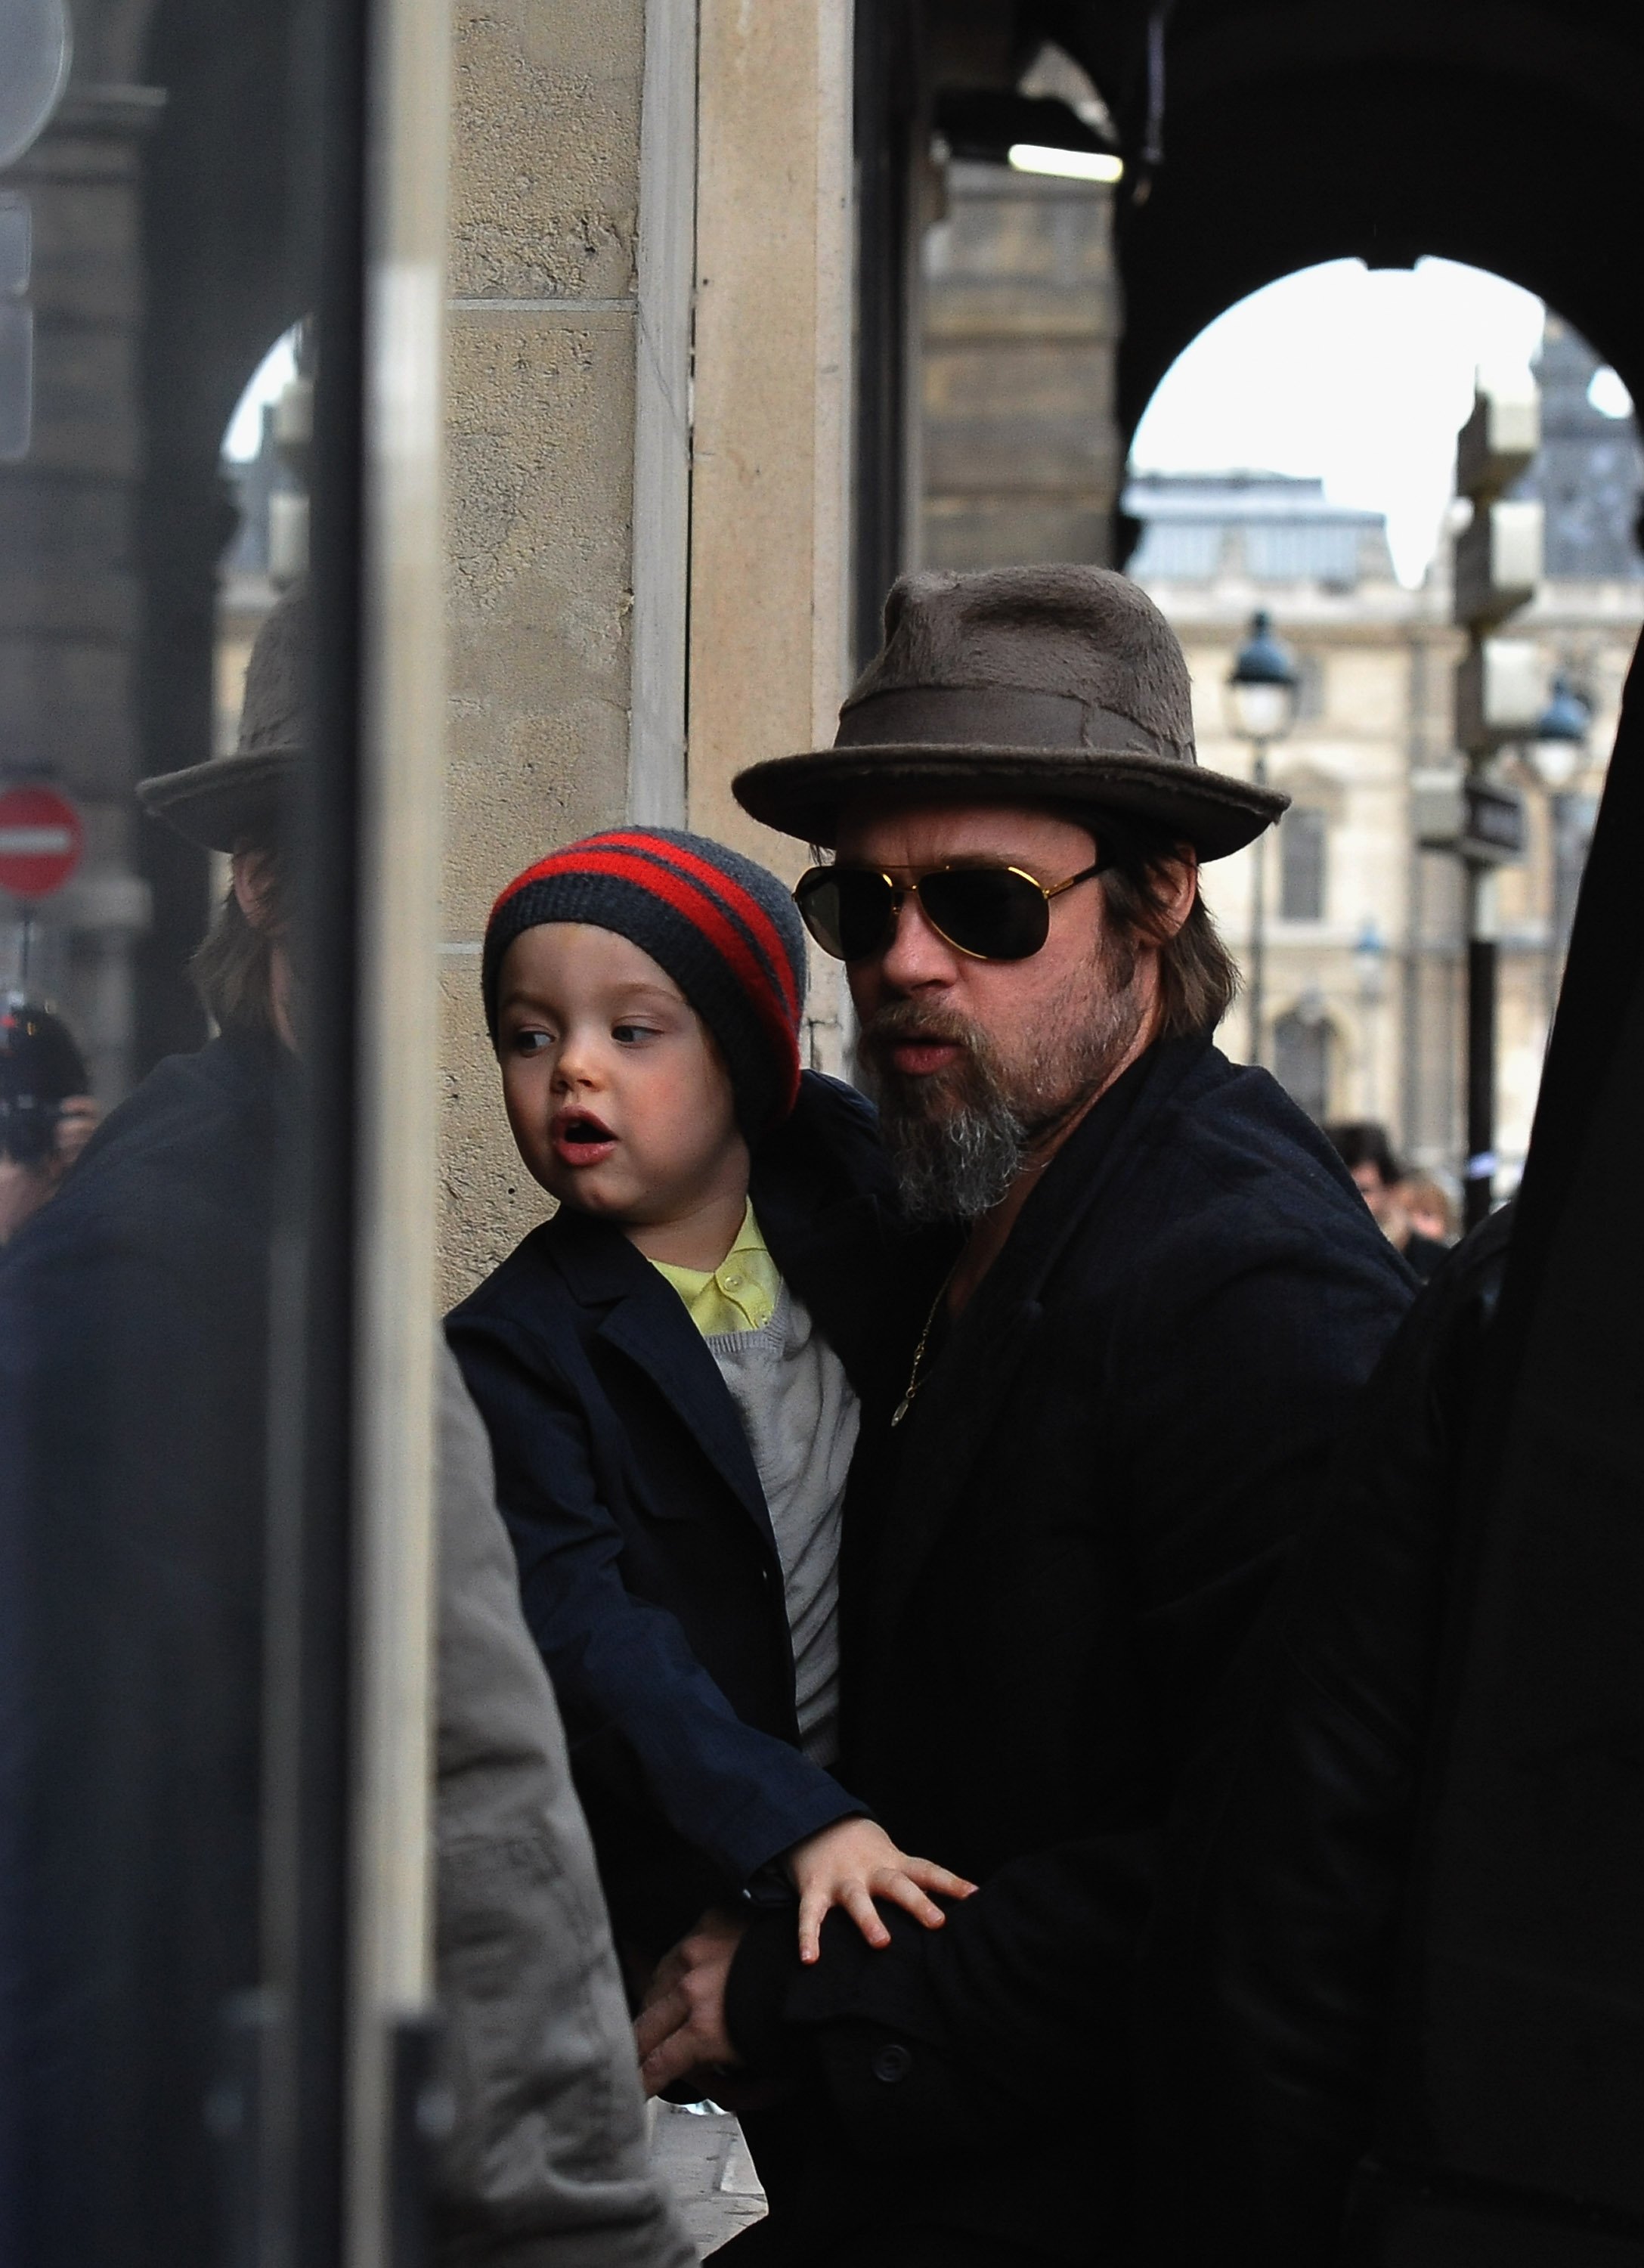 Brad Pitt and Shiloh Jolie-Pitt shopping at Bonpoint\\u00a0on February 23, 2010, in Paris, France | Source: Getty Images